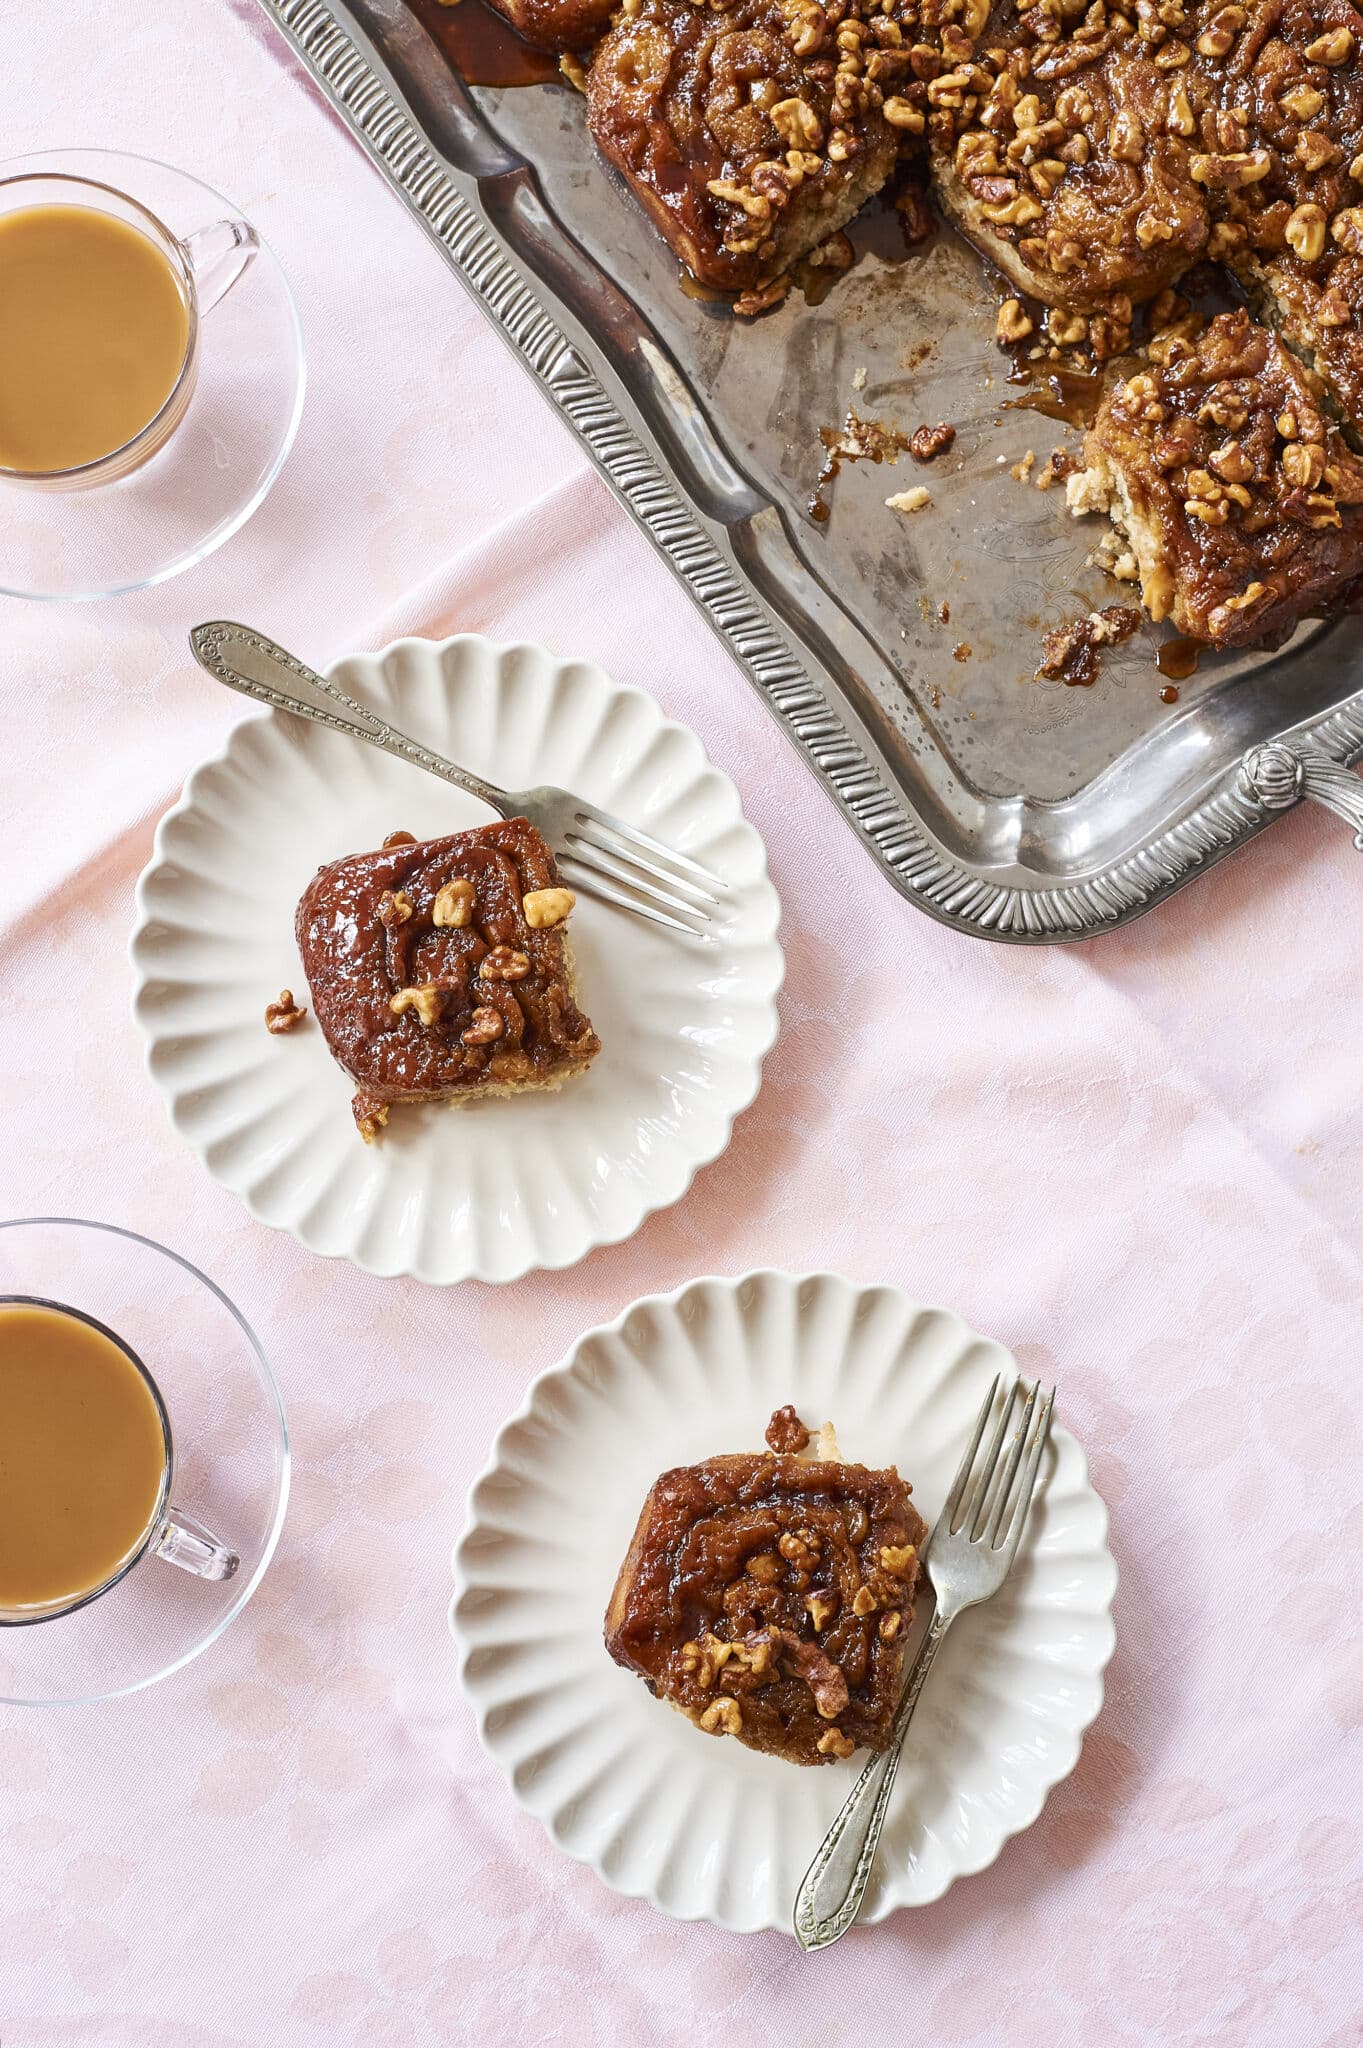 Two of Banana Upside Down Cinnamon Rolls are served on two white scalloped-edge dessert plates with forks, paired with tea. The top is caramelized and crowned with toasted nuts.